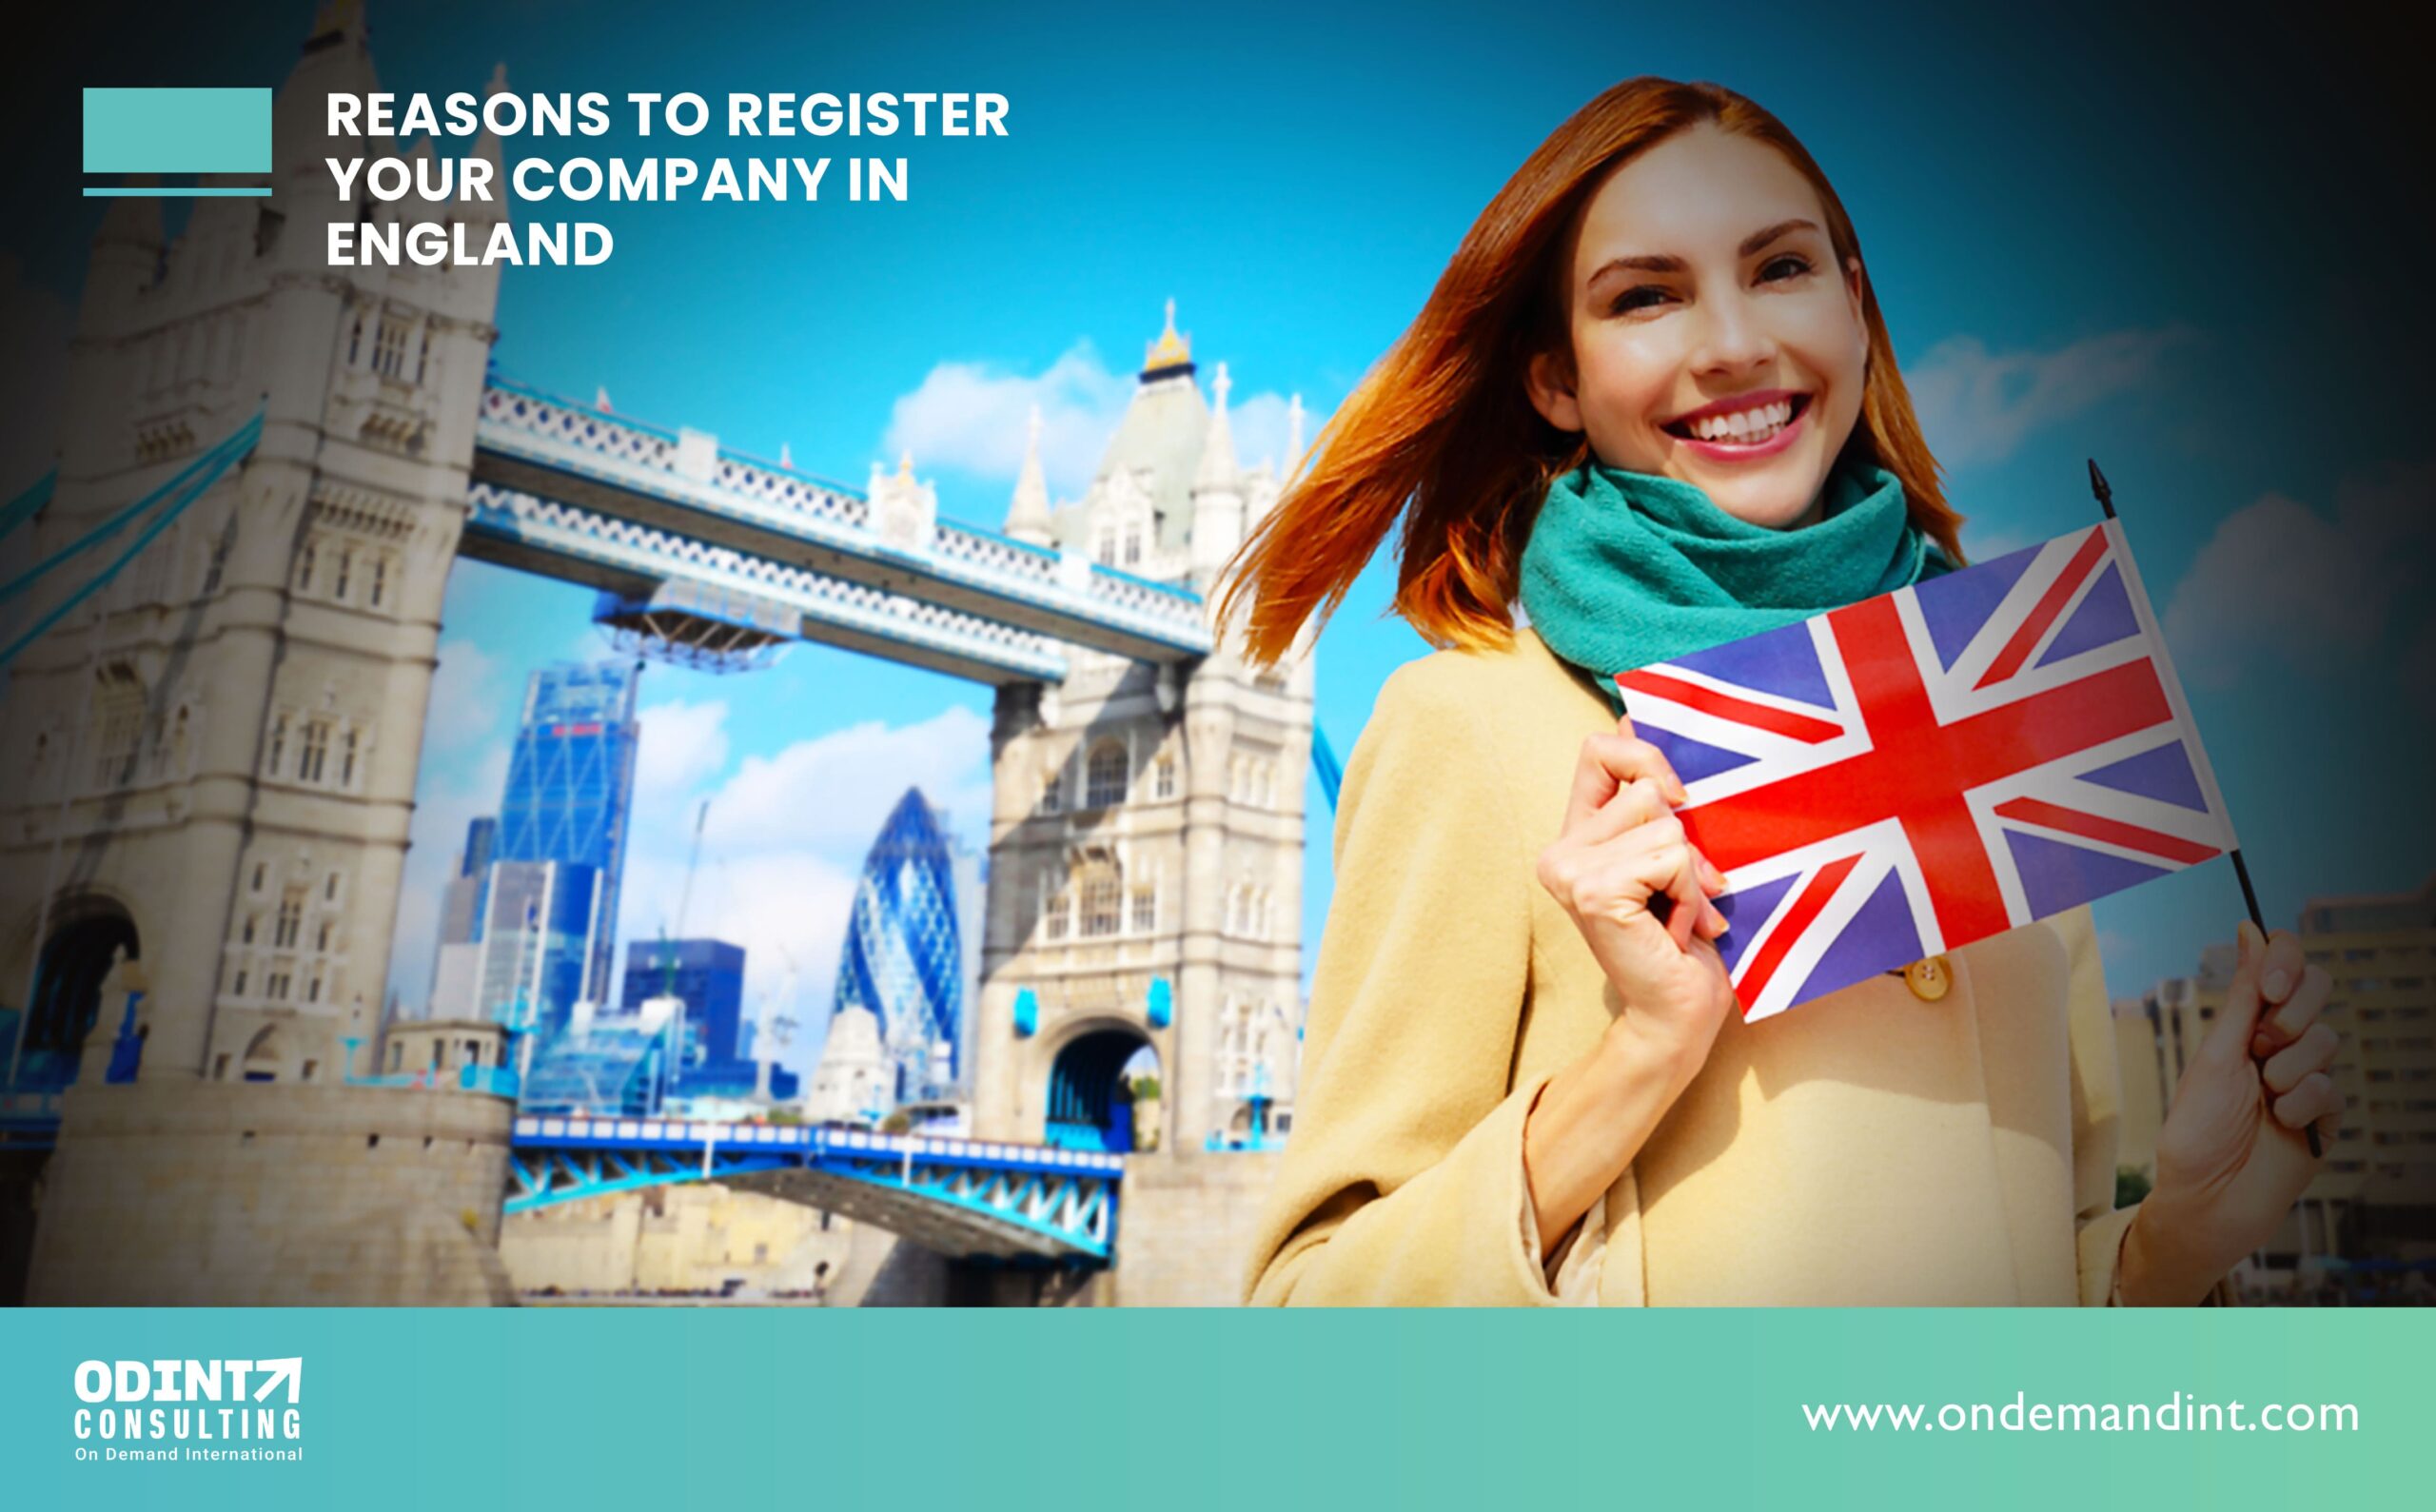 9 Reasons To Register Your Company In England